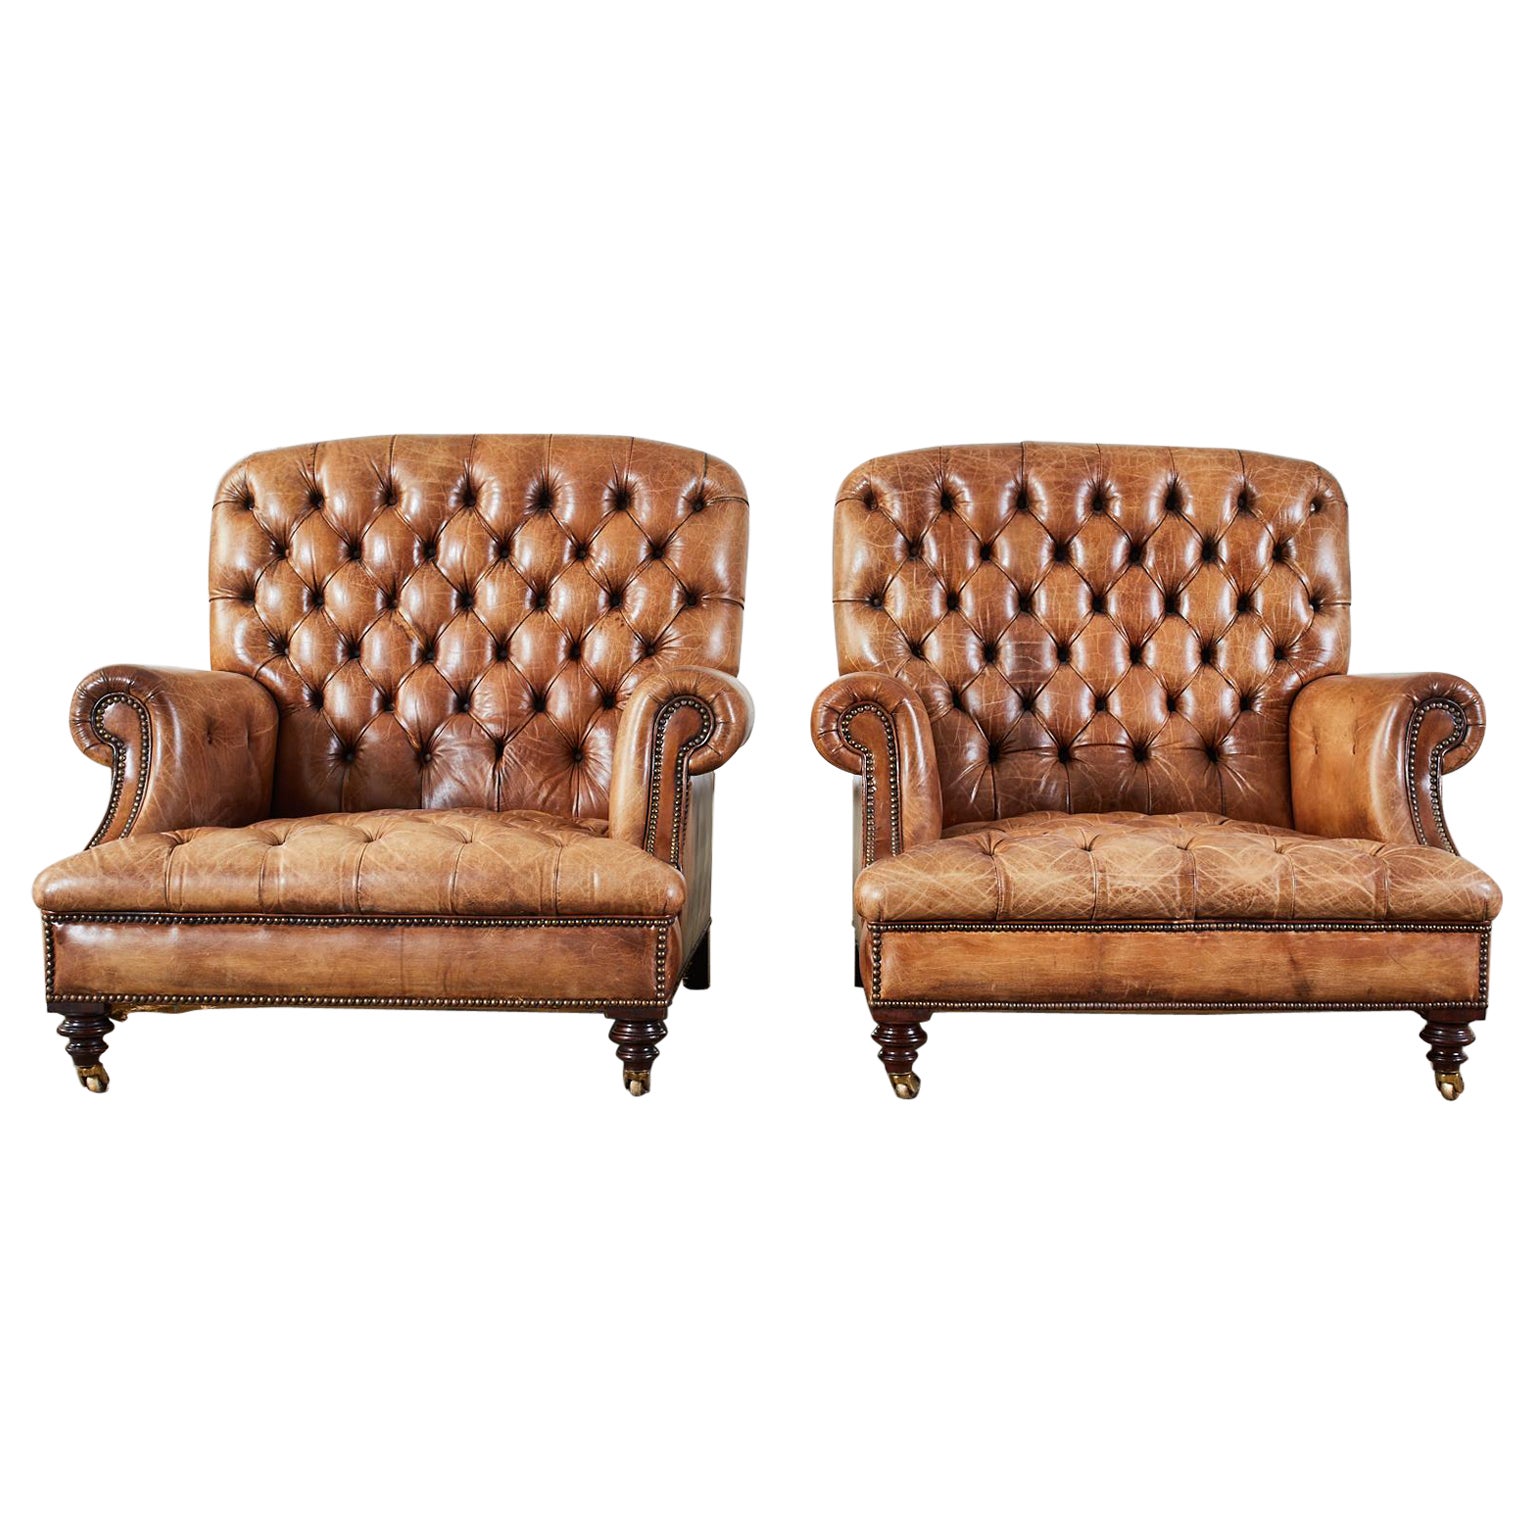 Grand Pair of English Georgian Style Cigar Leather Library Chairs